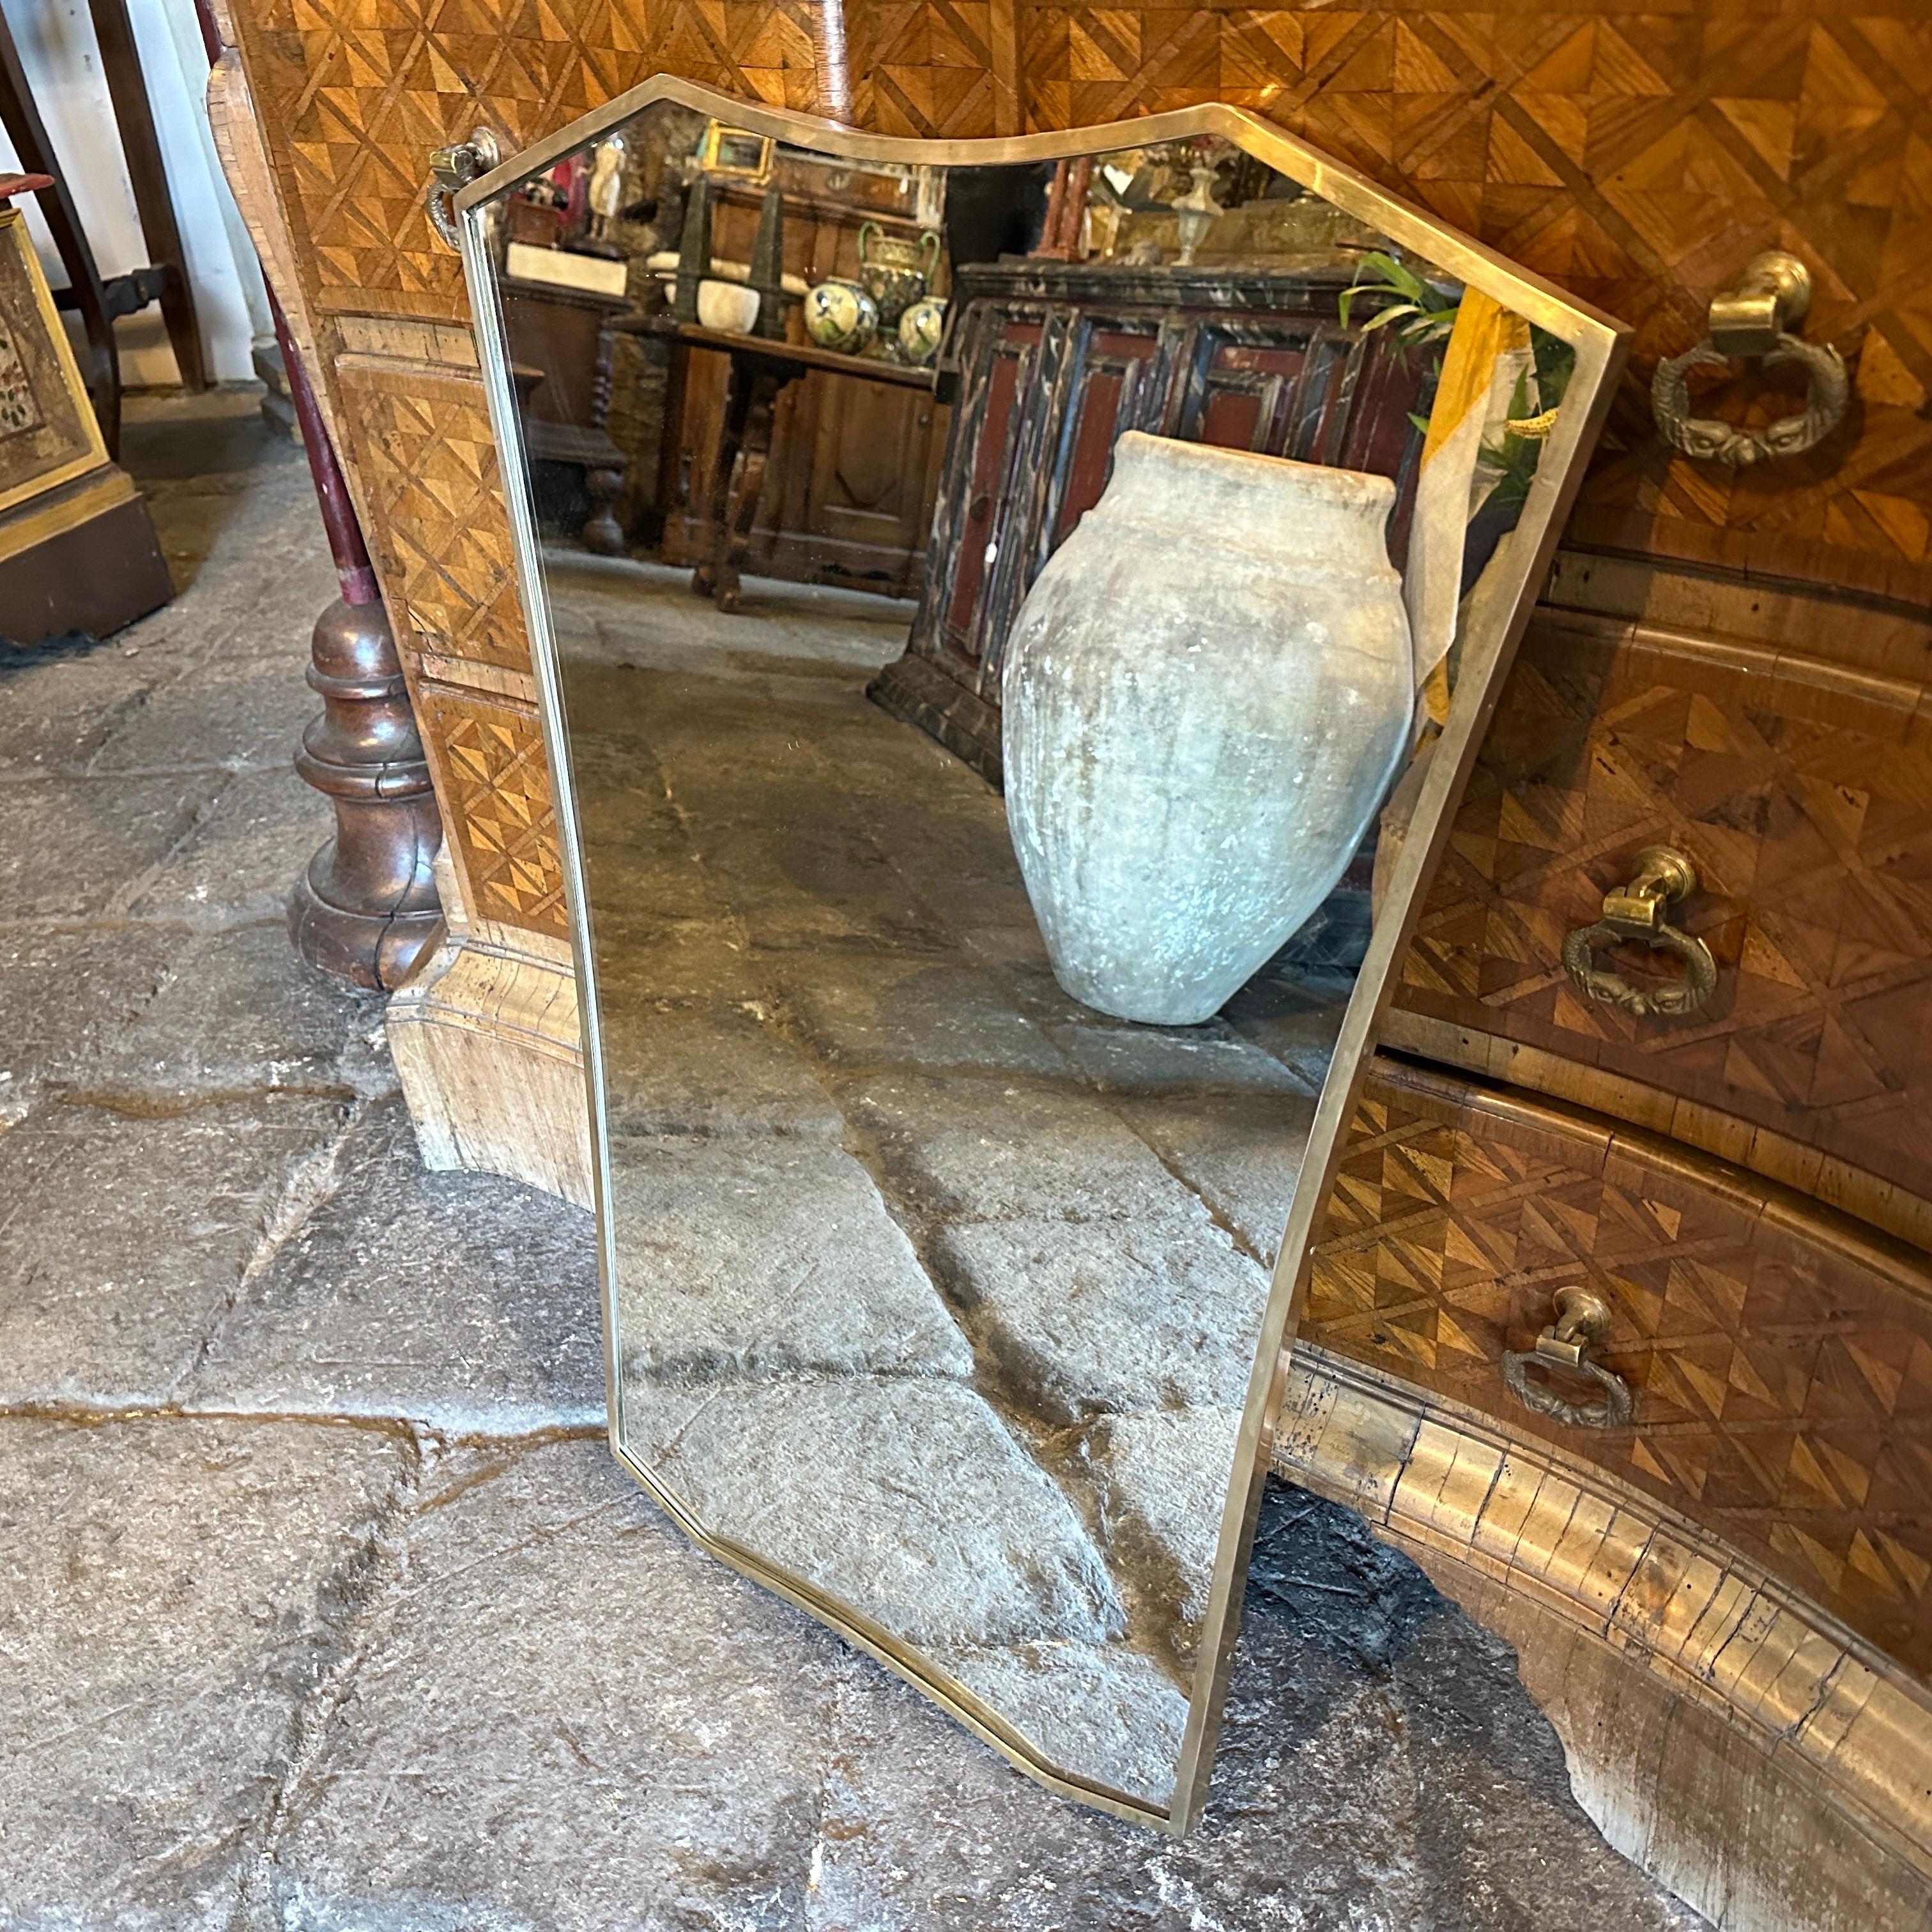 An amazing mid-century modern, well-shaped, solid brass wall mirror handcrafted in Italy in the Fifties in the manner of Gio Ponti, who used these wall mirrors to furnish the most prestigious homes in Milan in the 1950s. The mirror is in its